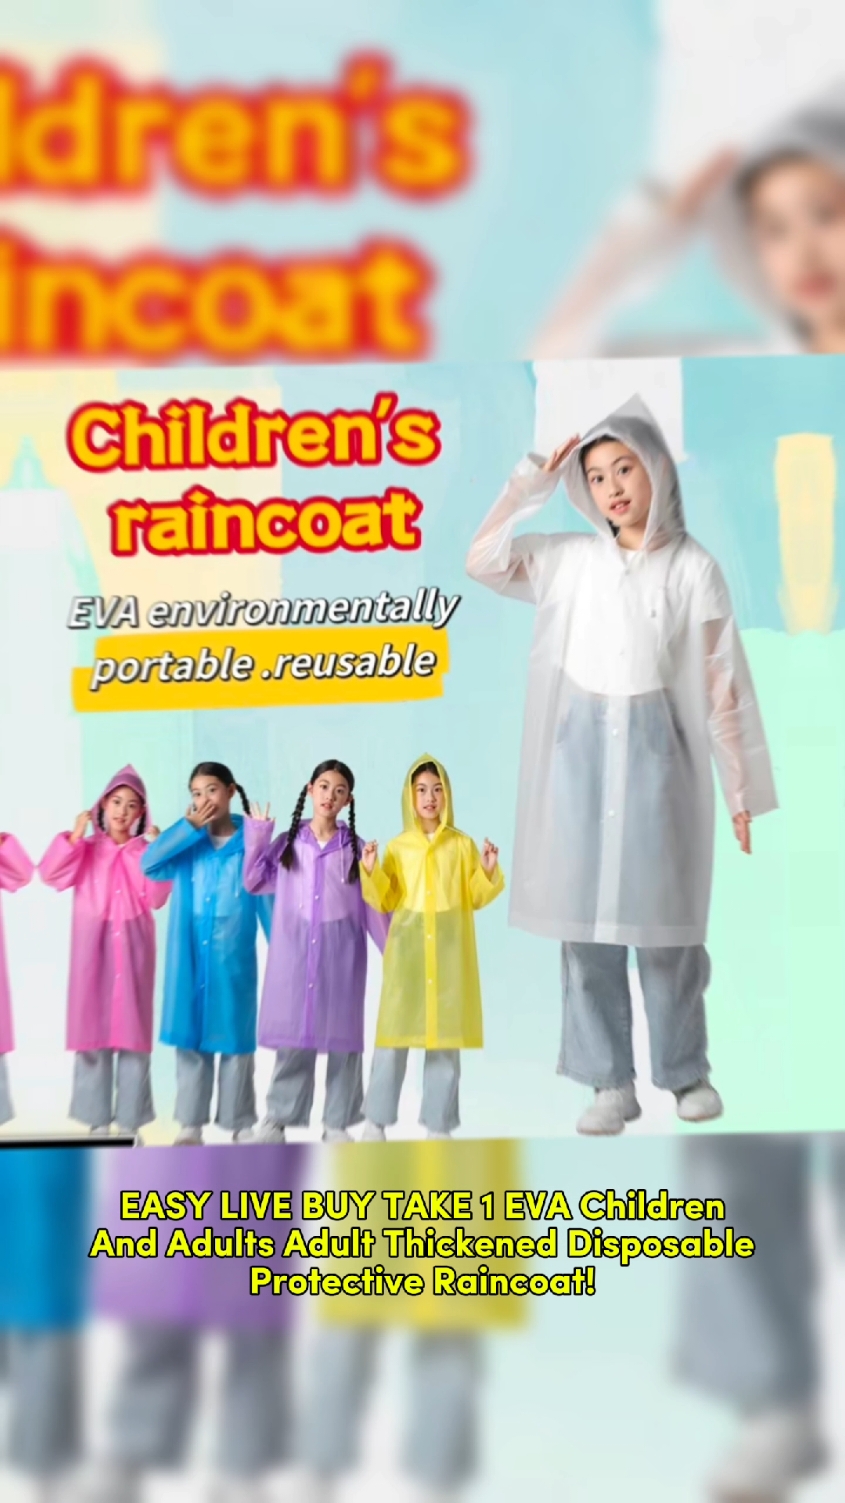 EASY LIVE BUY TAKE 1 EVA Children And Adults Adult Thickened Disposable Protective Raincoat! #raincoat#childrensraincoat#disposableraincoat#fyp 